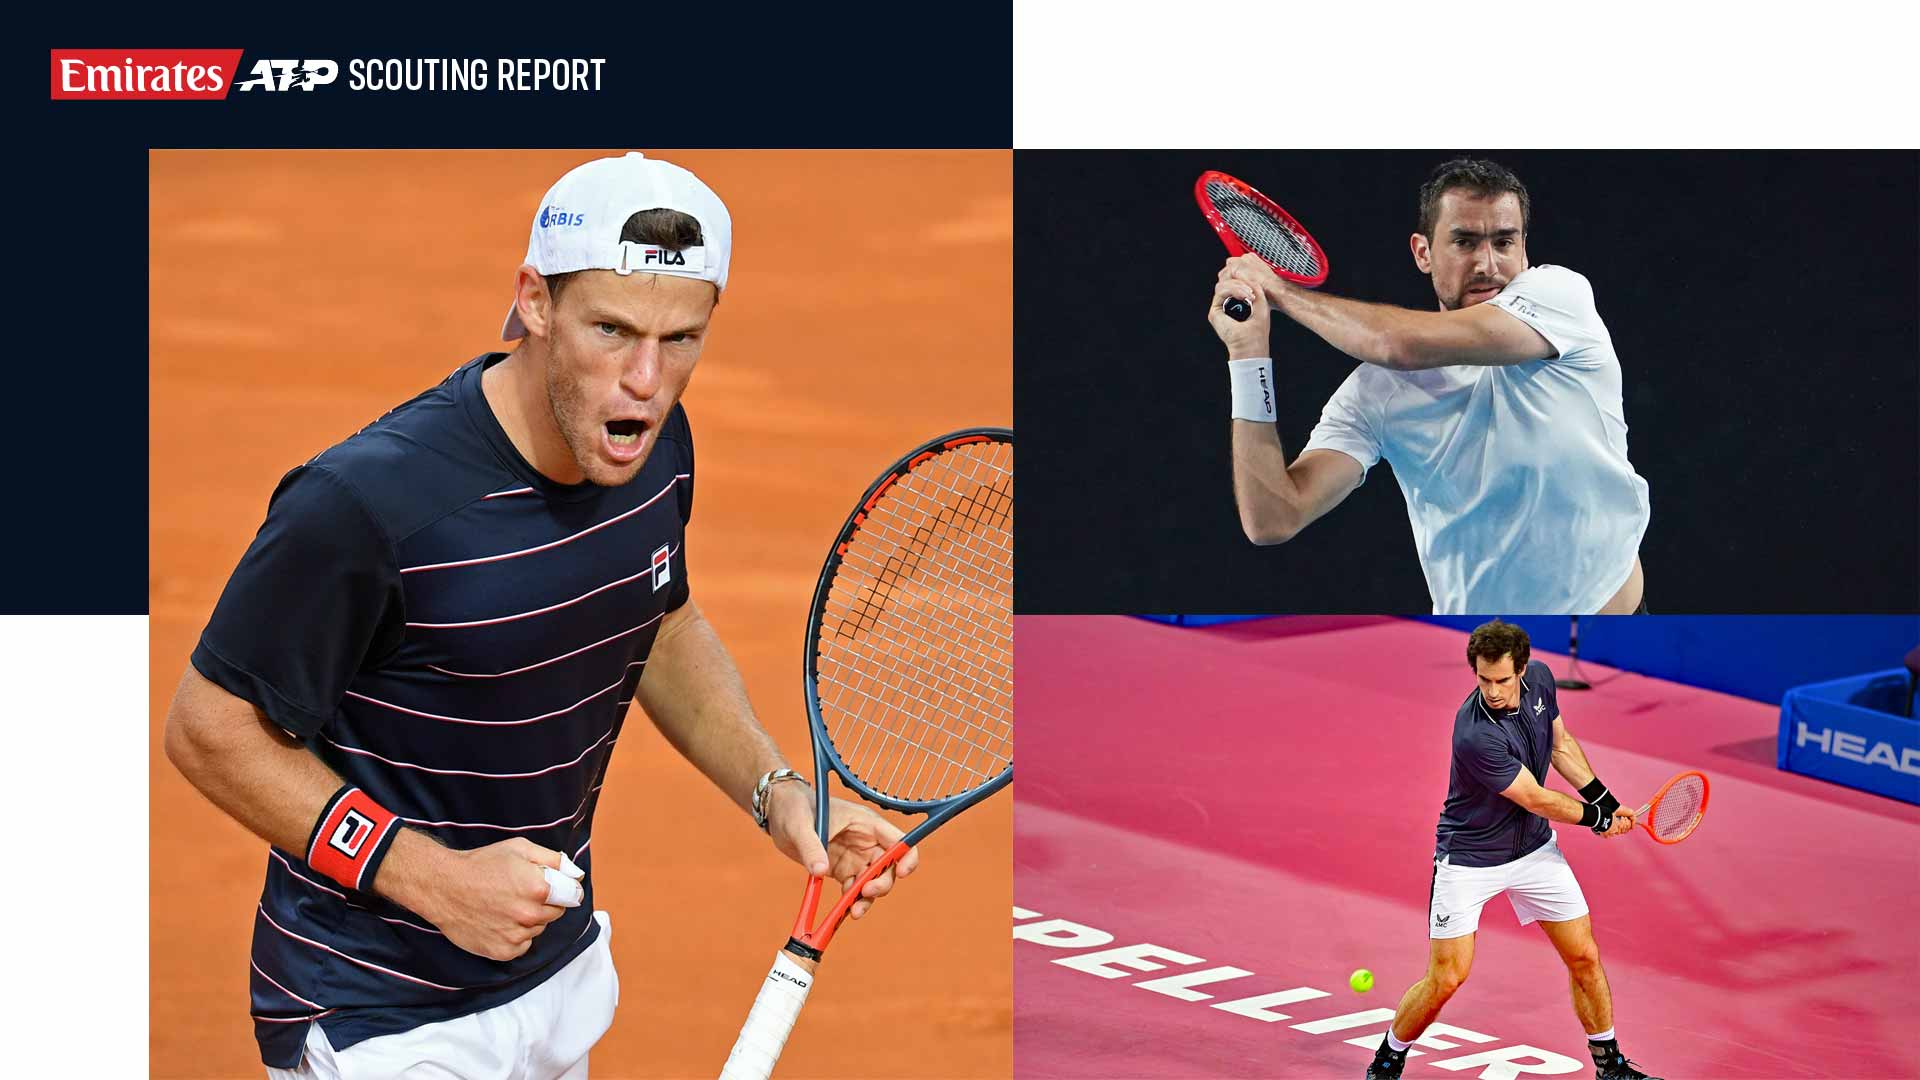 Scouting Report 15 Things To Watch In Cordoba, Montpellier and Singapore ATP Tour Tennis